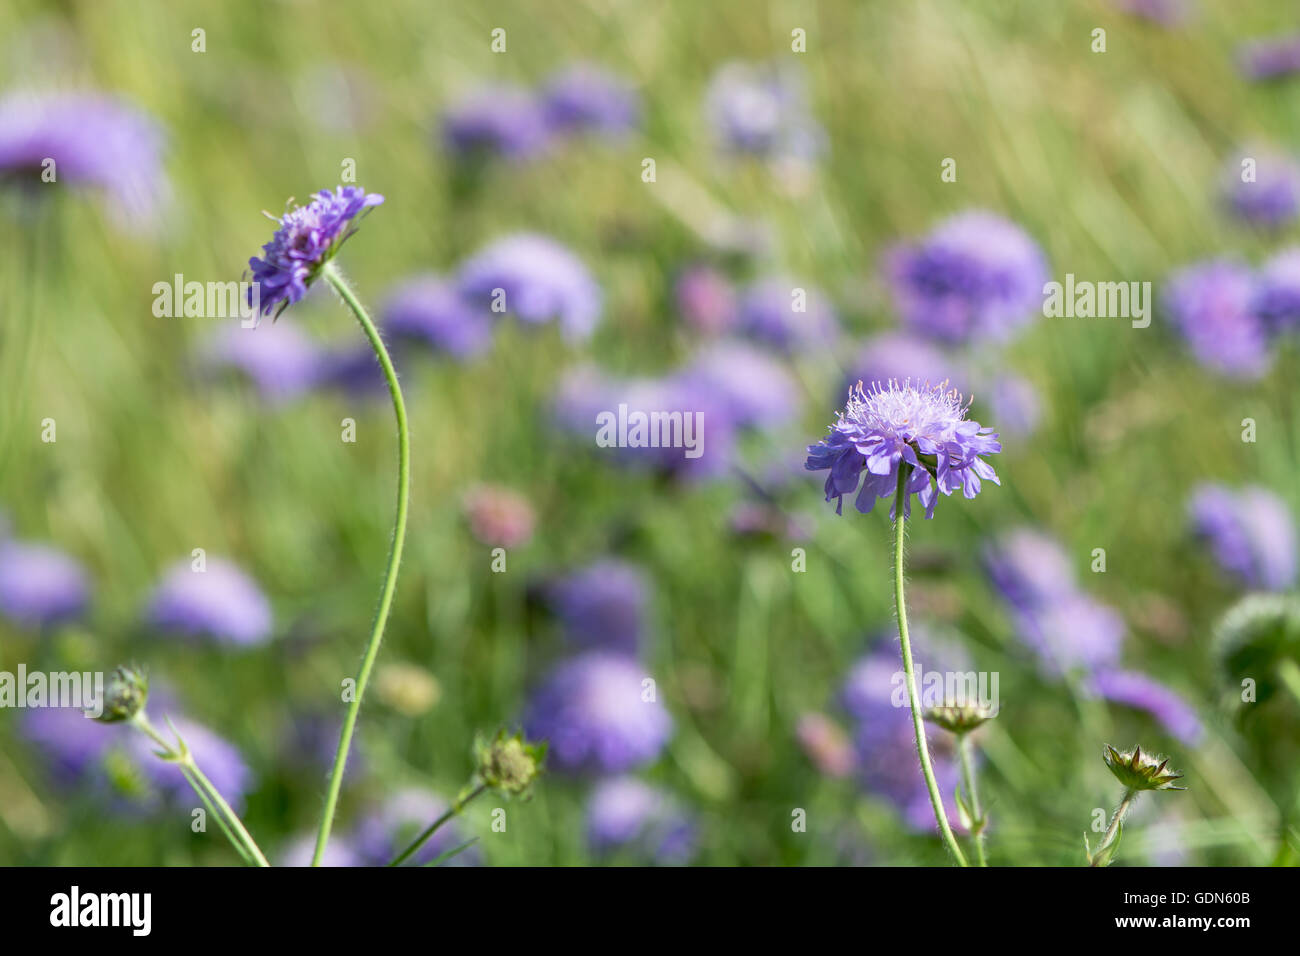 Field scabious (Knautia arvensis) group of flowers. Patch of purple flowered plants in the family Caprifoliaceae, in bloom Stock Photo